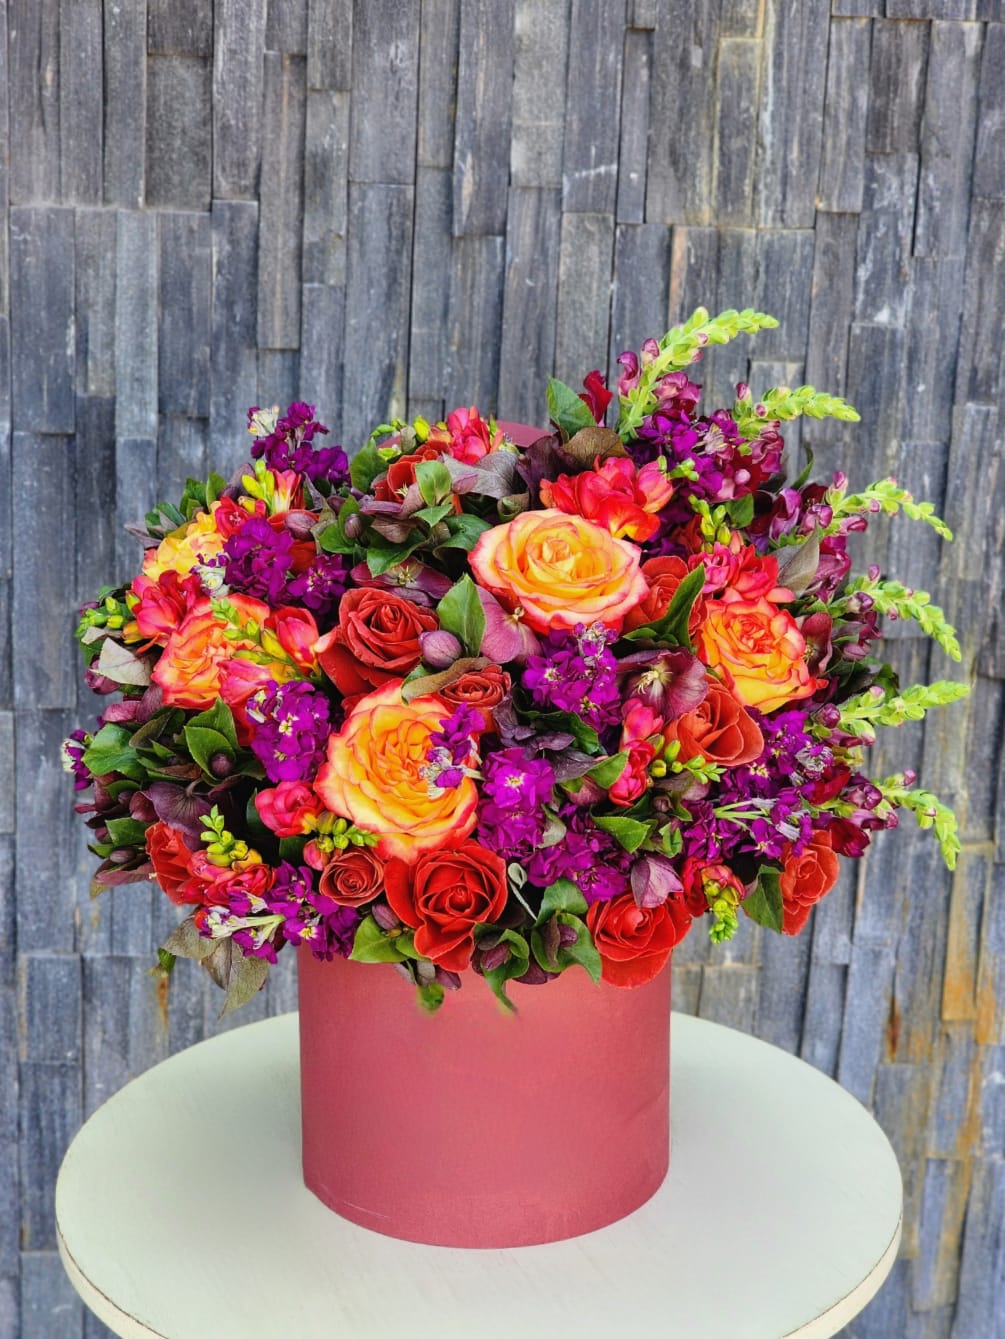 A floral mix featuring orange and red roses, along with other fall-style